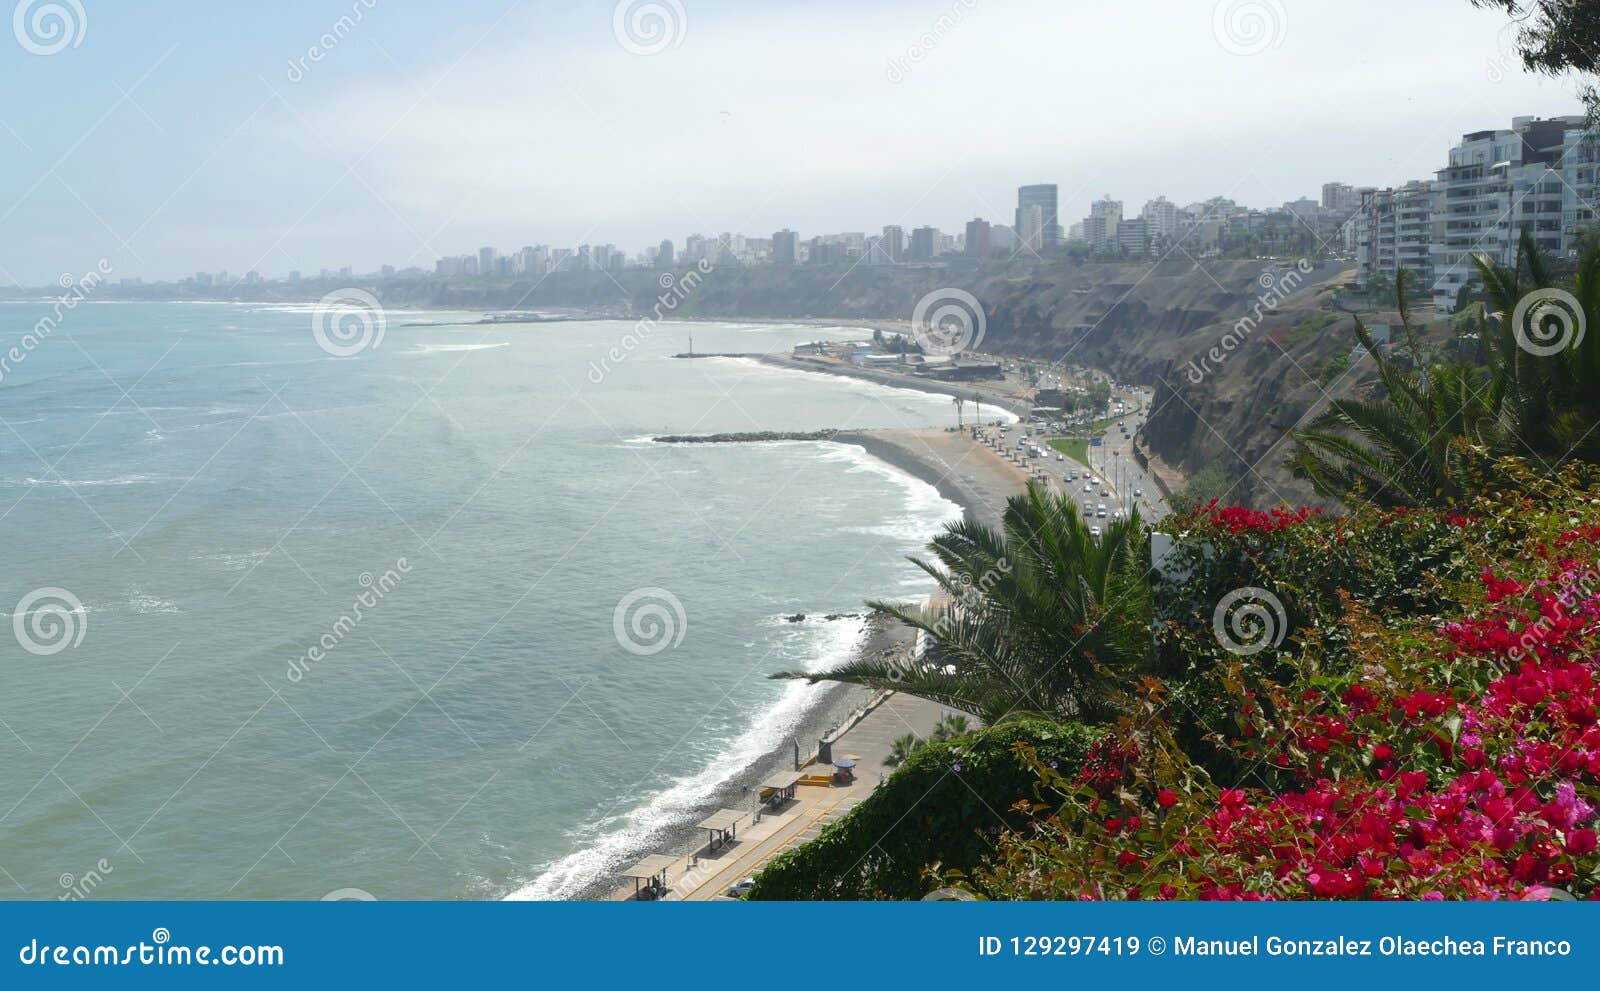 barranco view to the north of lima bay